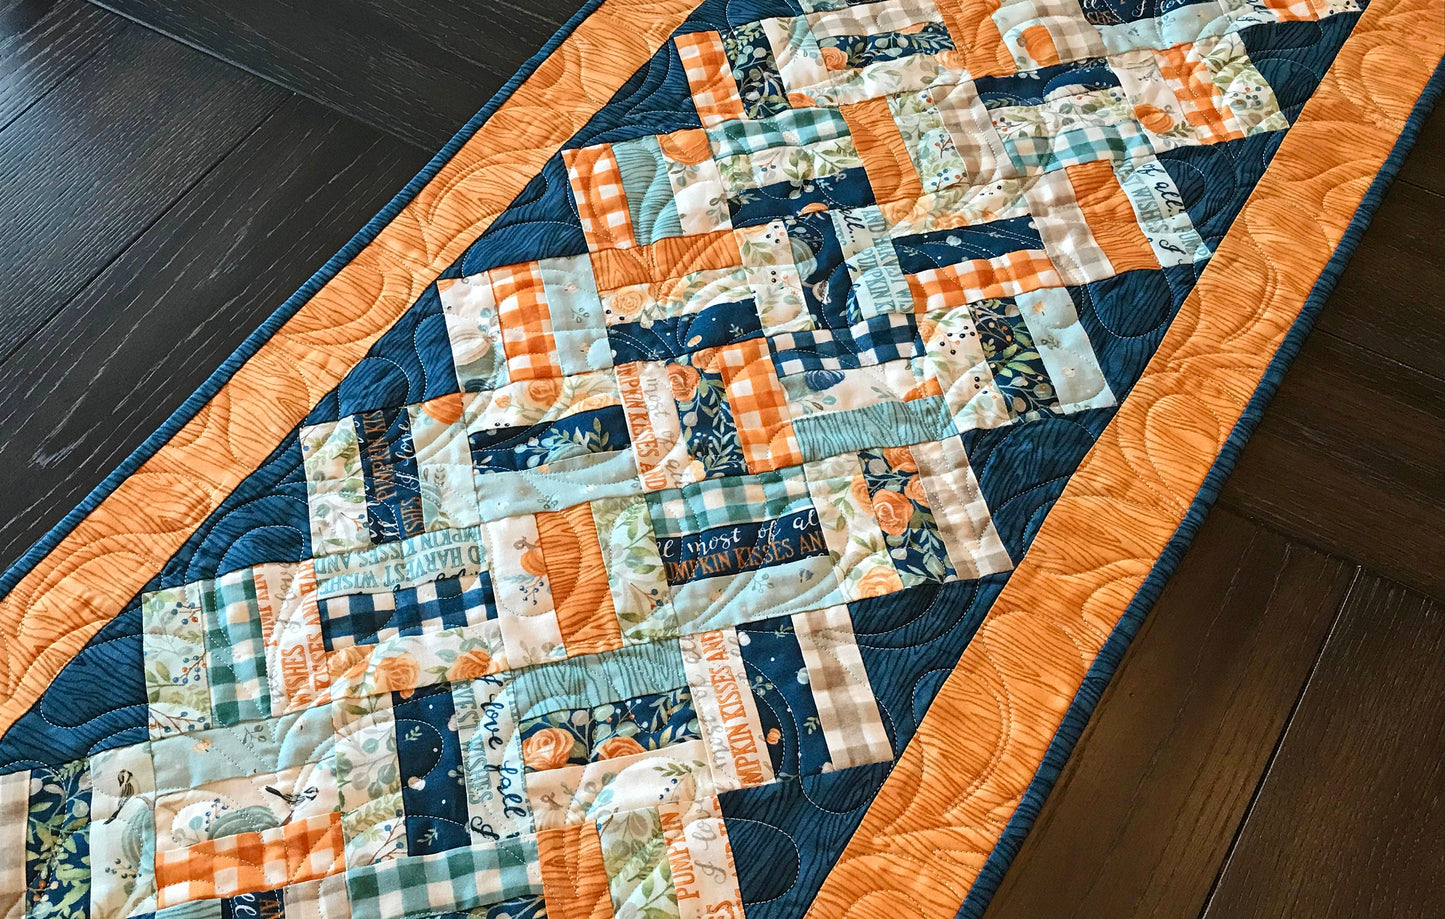 Braided Squares table runner and topper pattern. Sample runner and topper shown with a fall color scheme of dark blue, aqua, cream and orange.